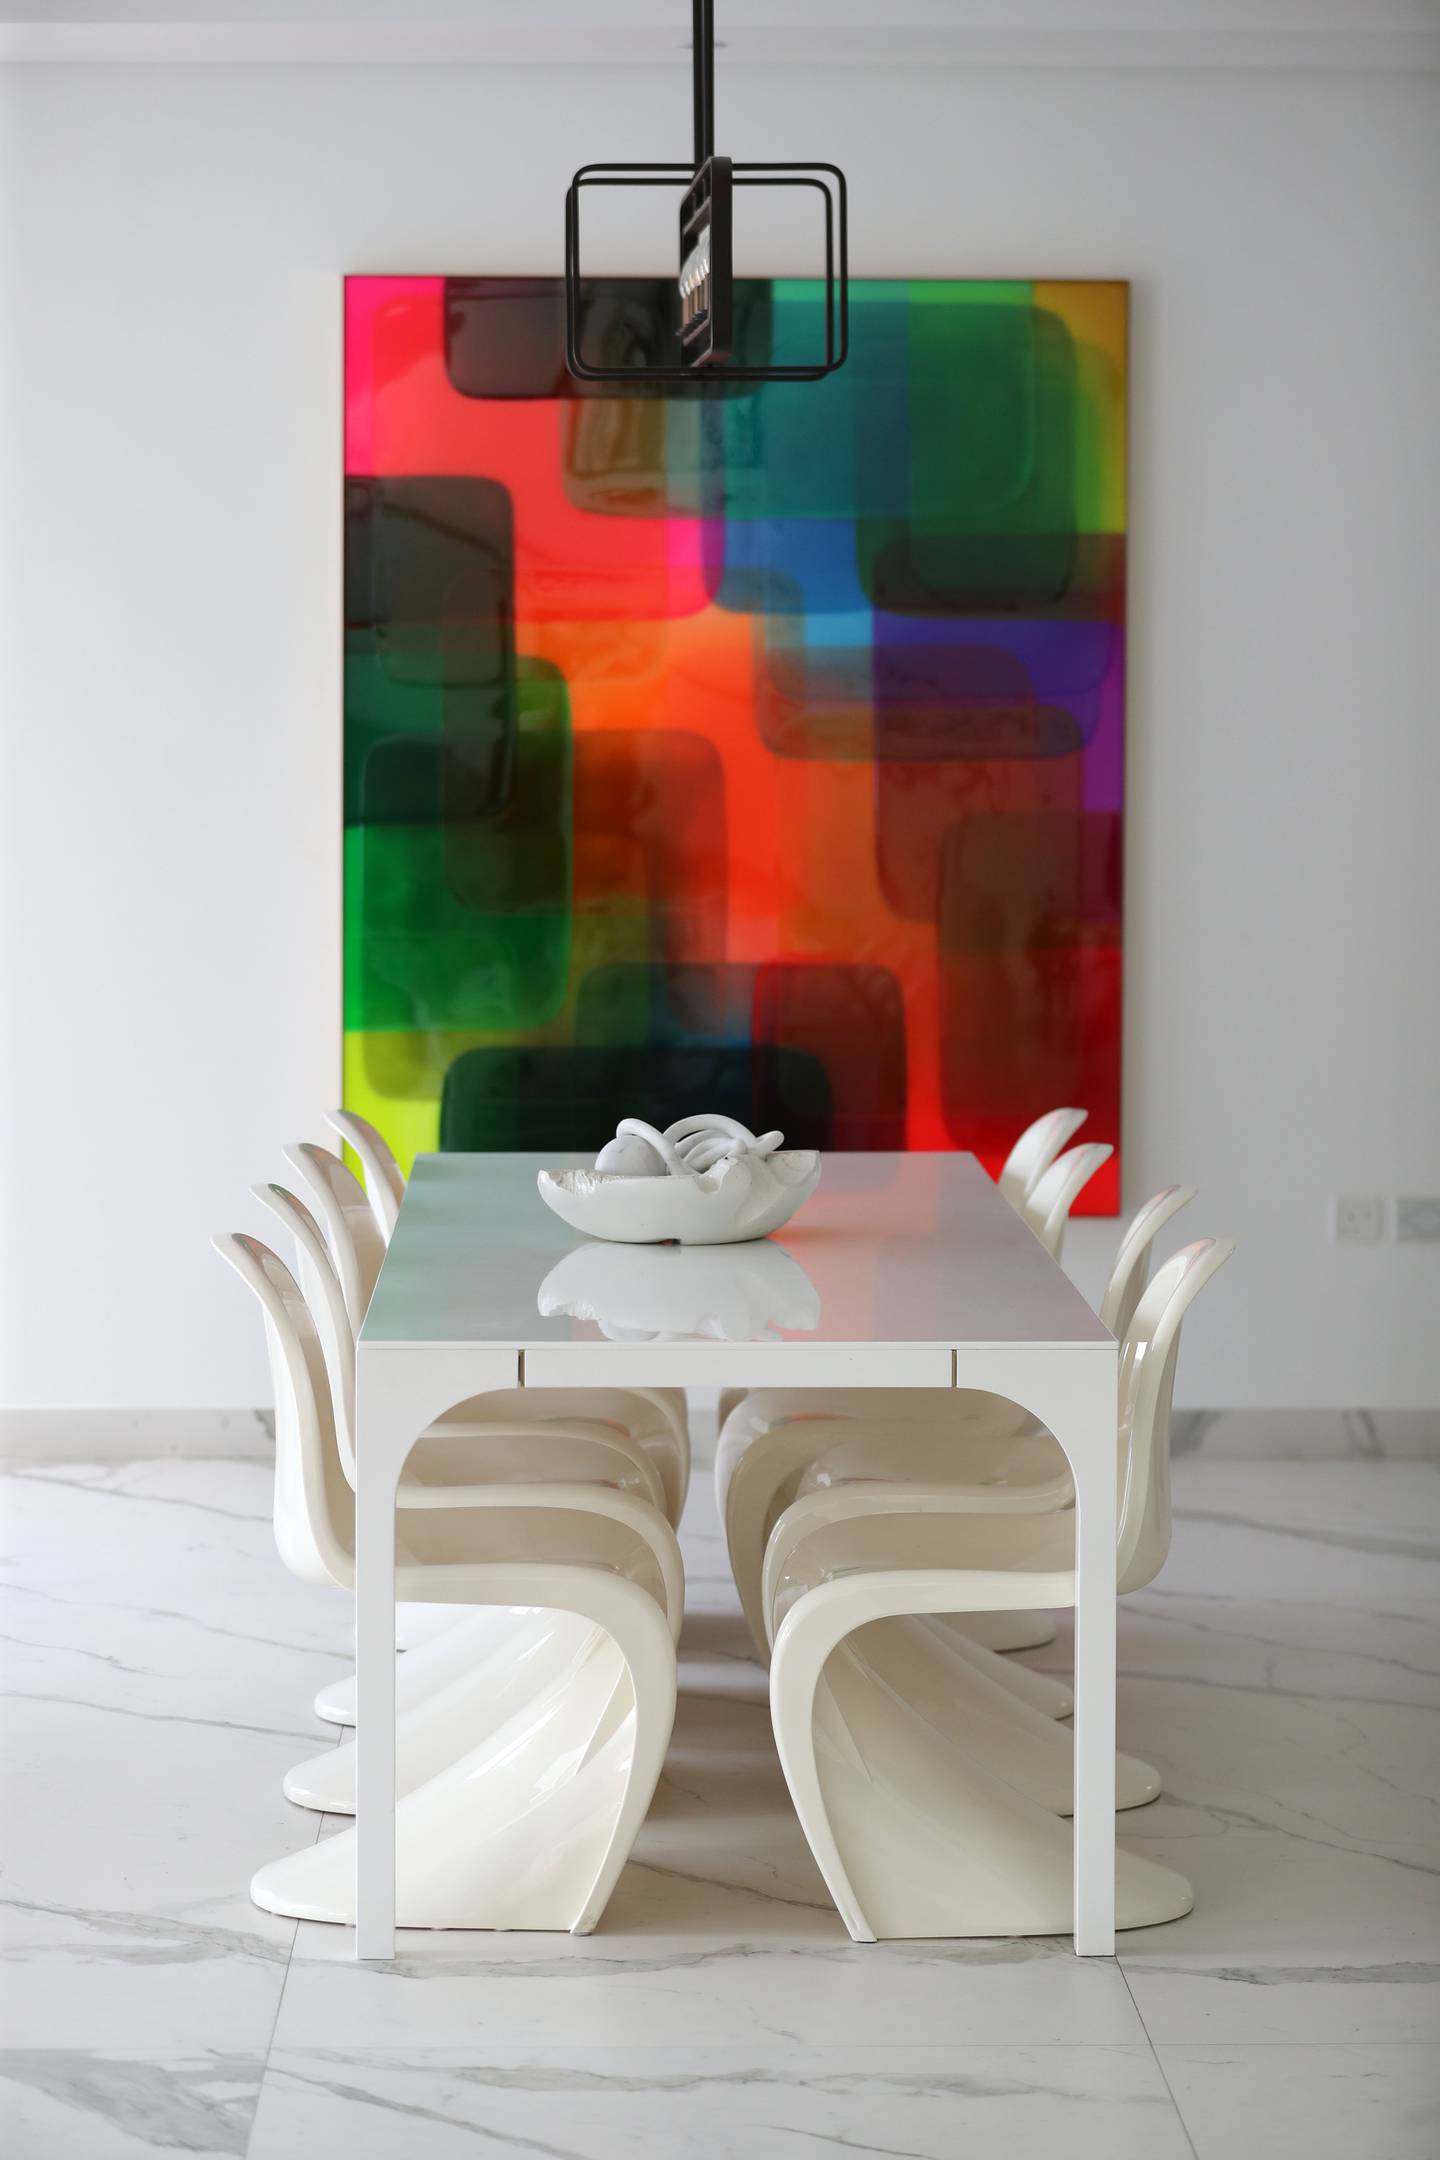 'Vibe' looms large above the dining table in artist Nat Bowen's home. Chris Whiteoak / The National